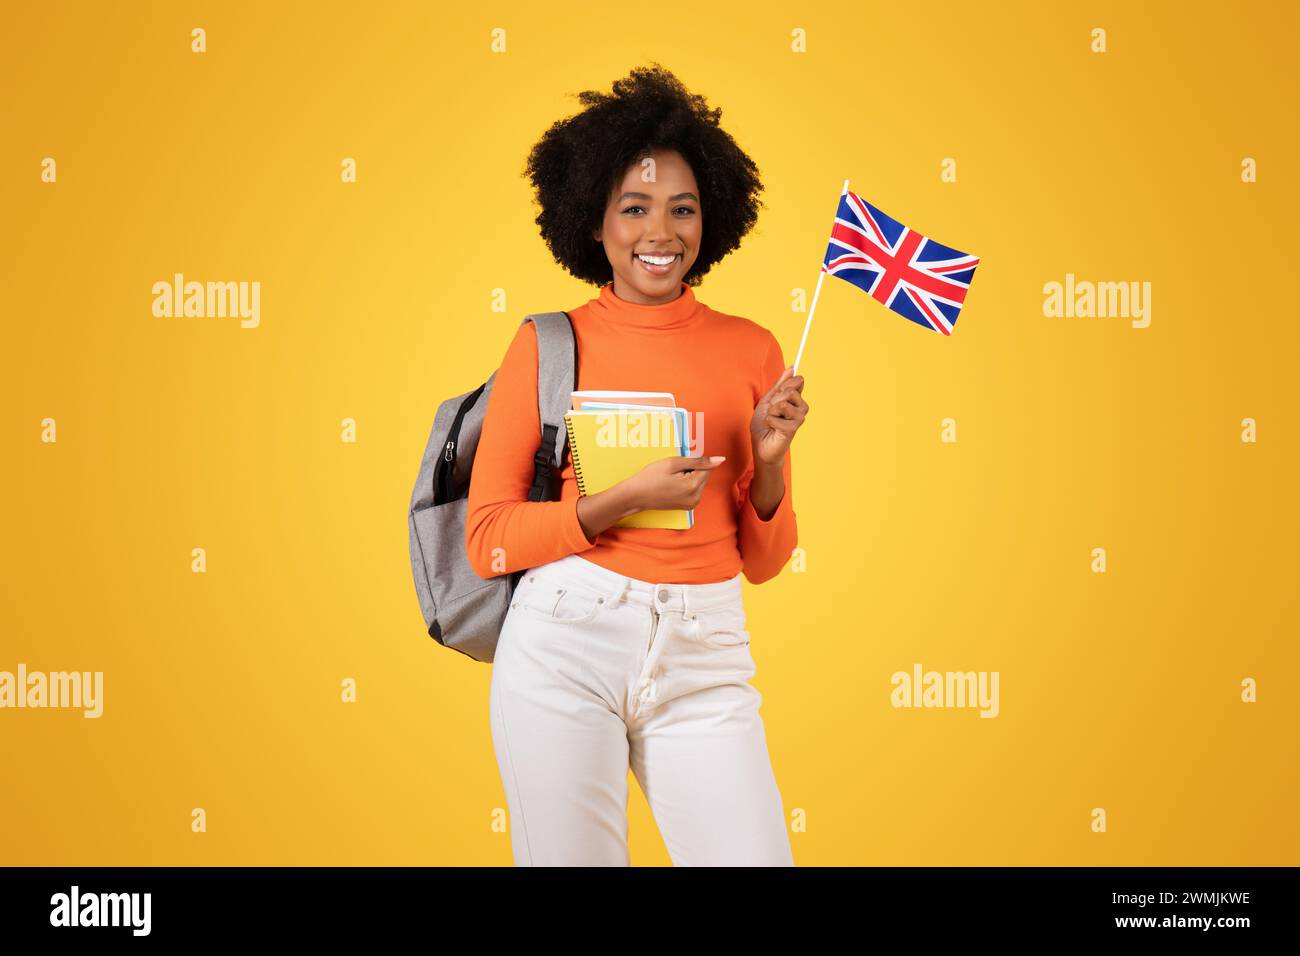 Smiling young student proudly holding a British flag, with notebooks and a gray backpack Stock Photo